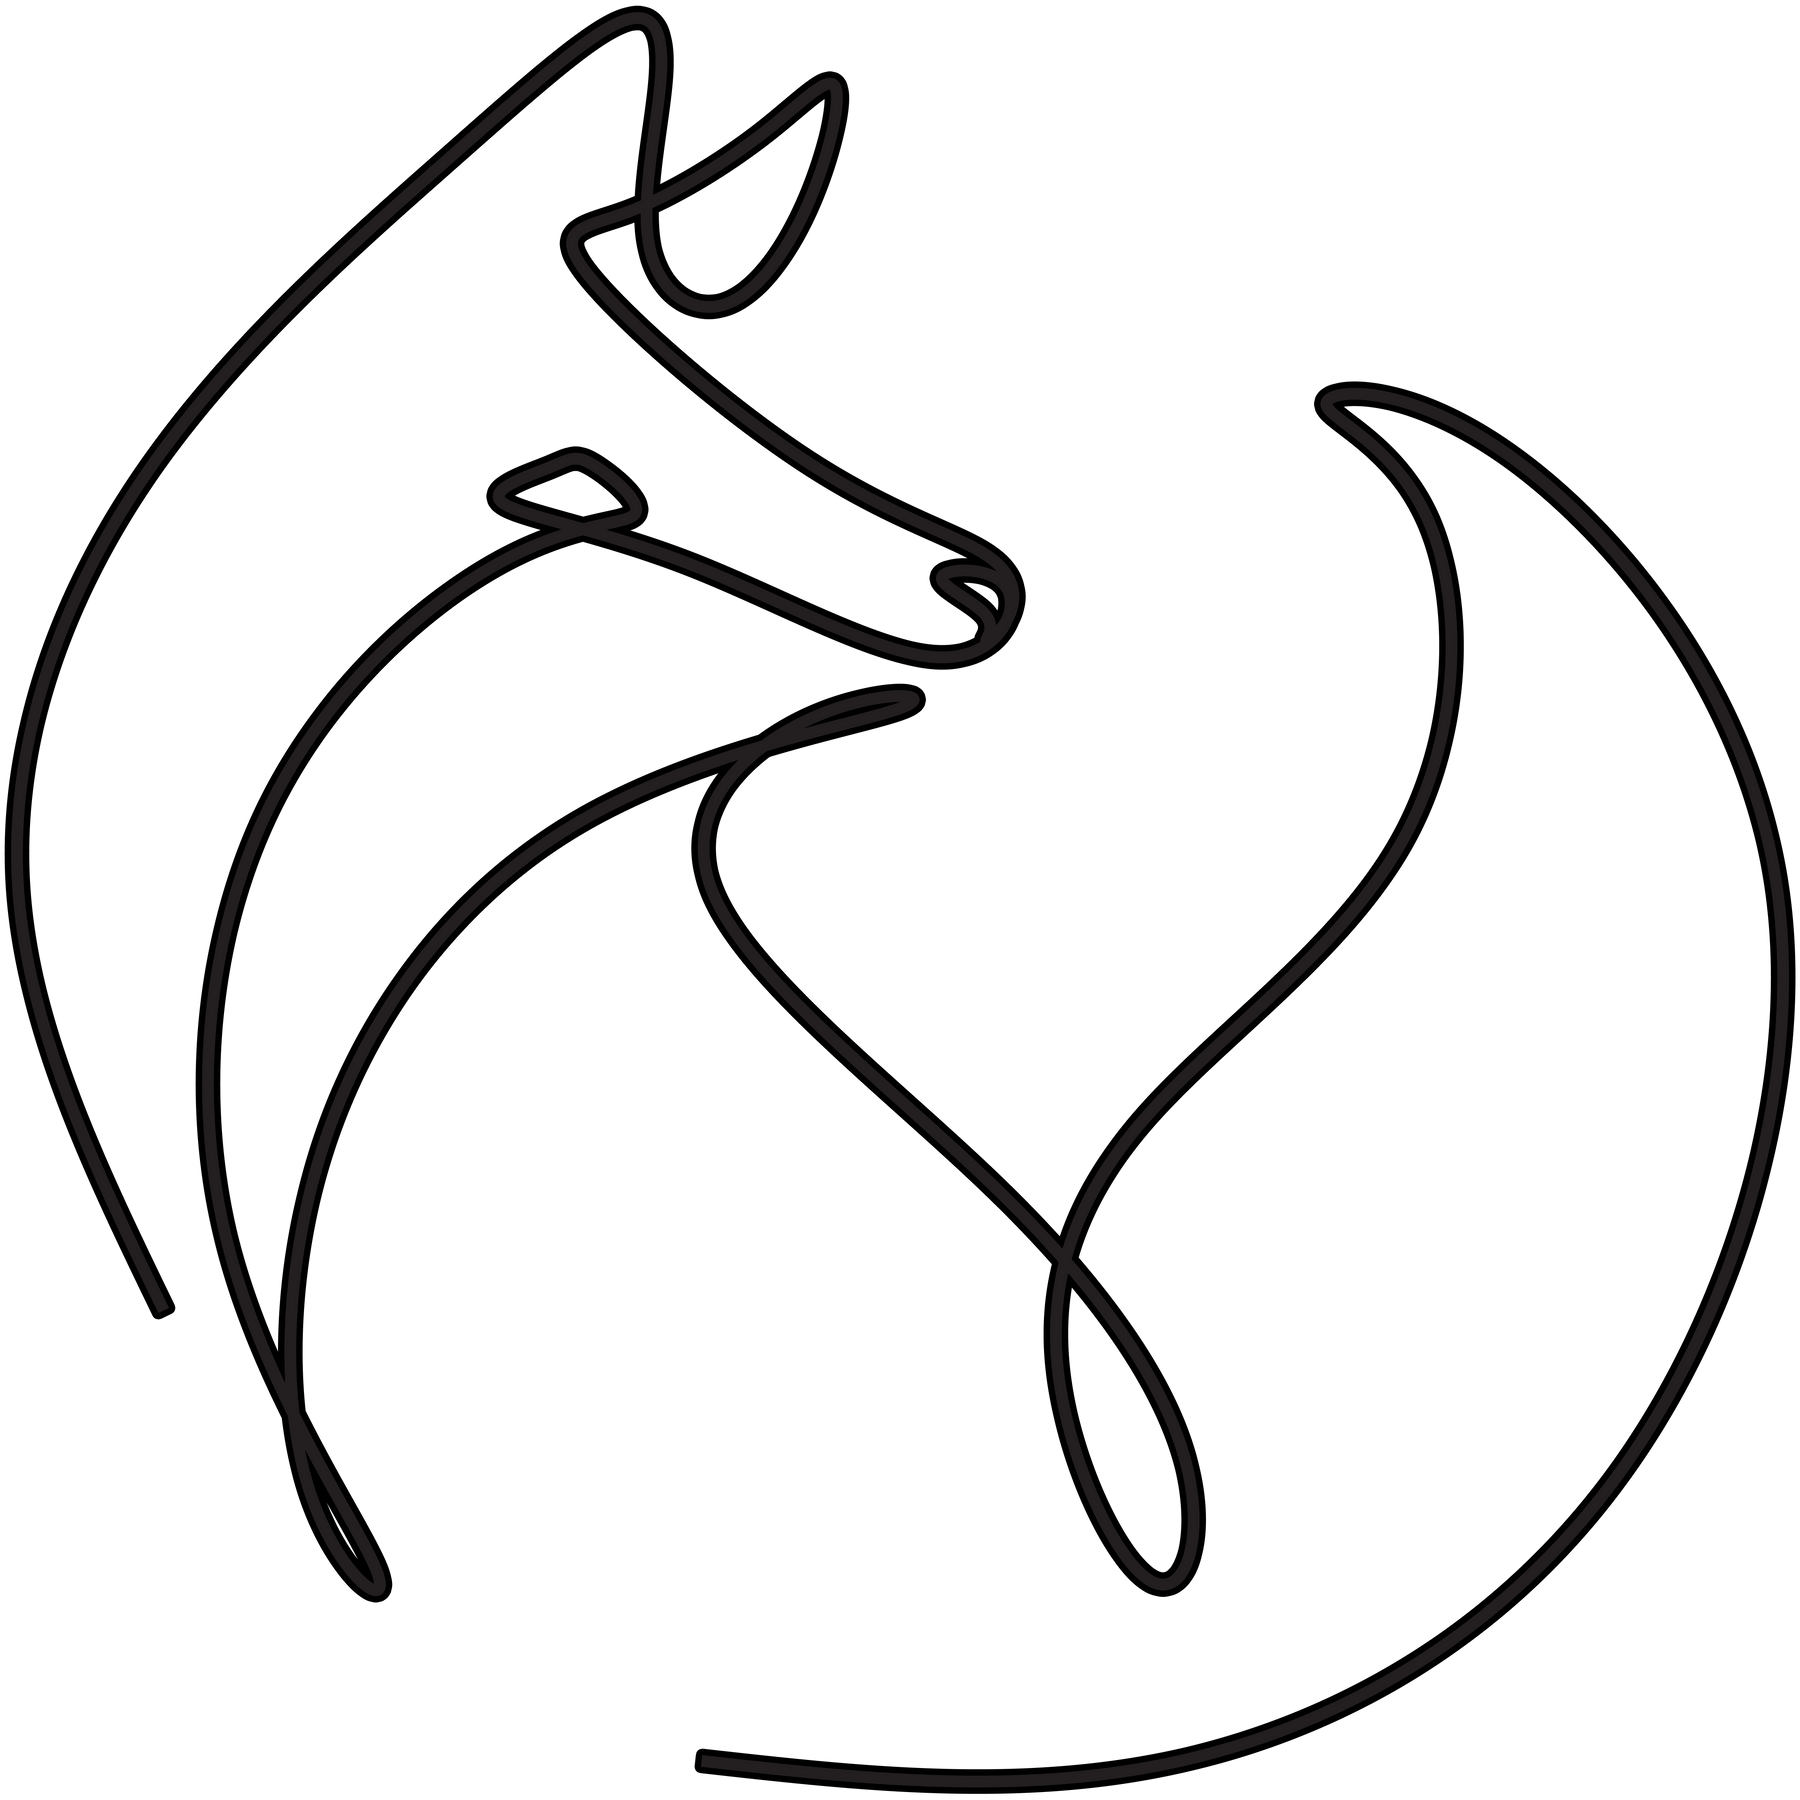 an artistic line drawing of a fox